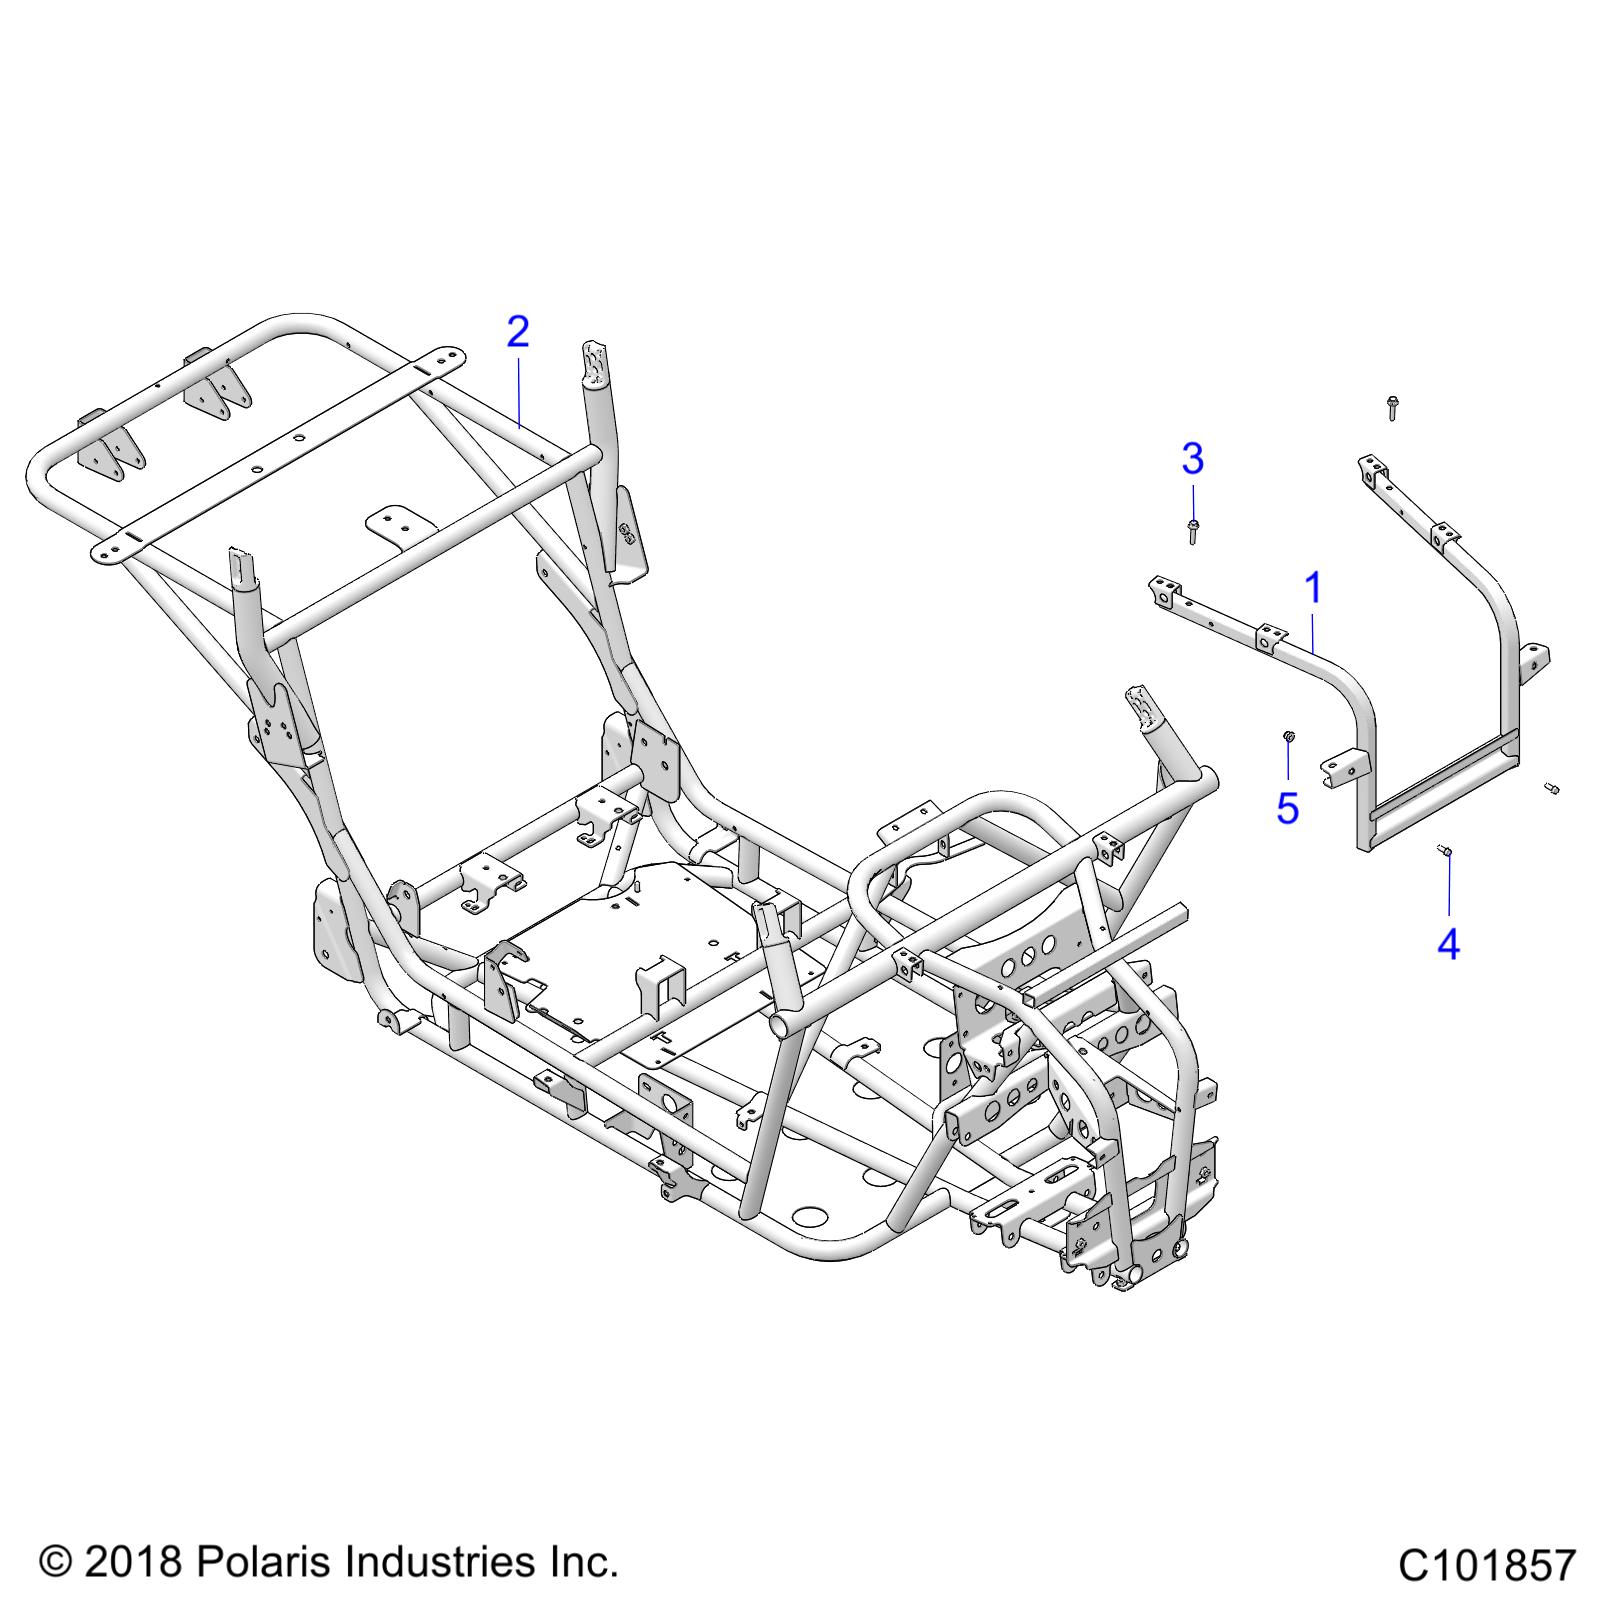 CHASSIS, MAIN FRAME - A20HAB15A2 (C101857)